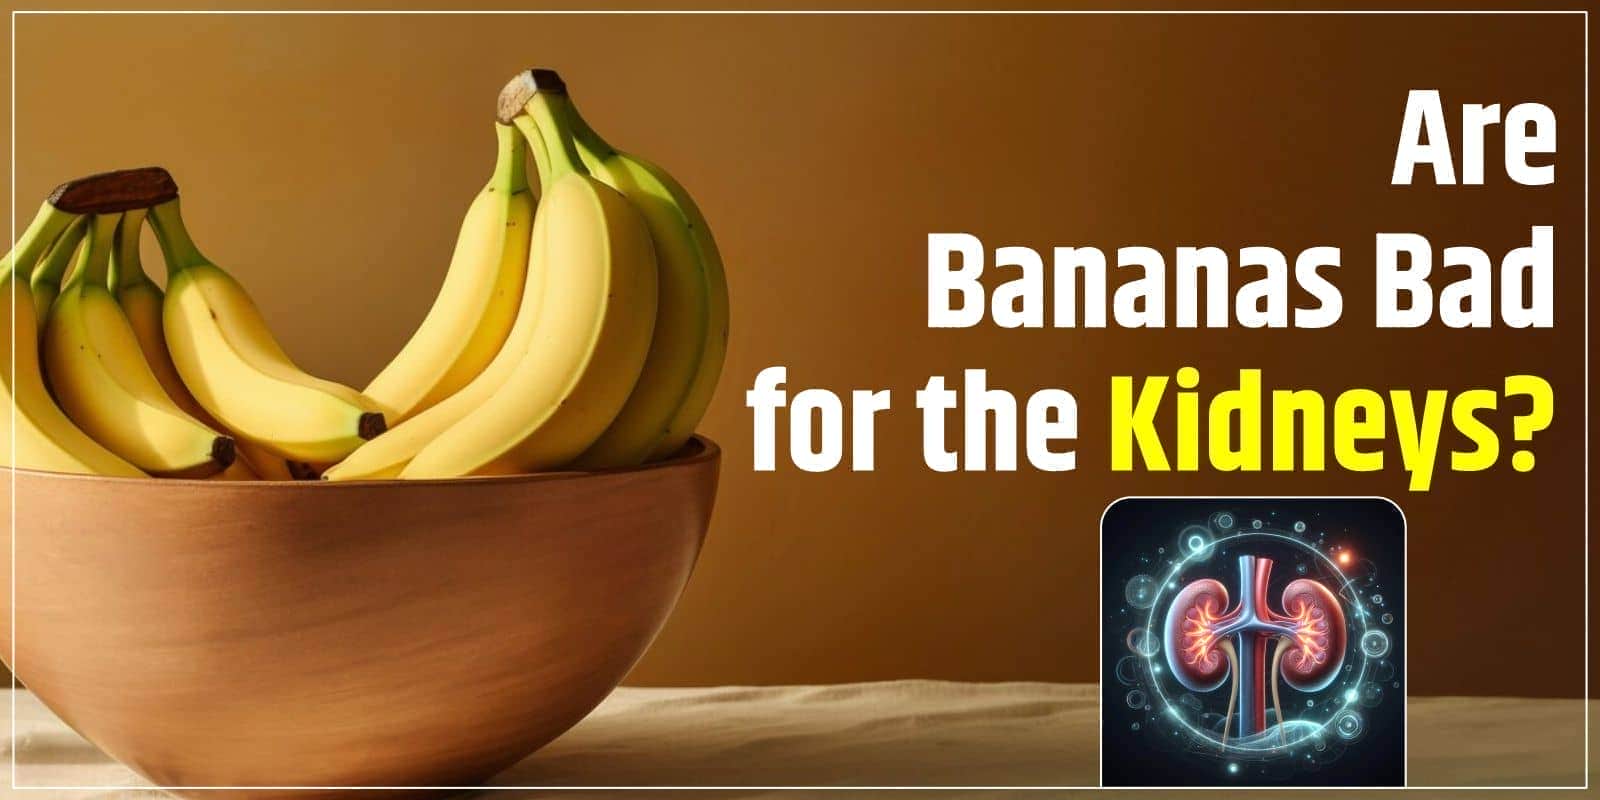 Are Bananas Bad for the Kidneys?